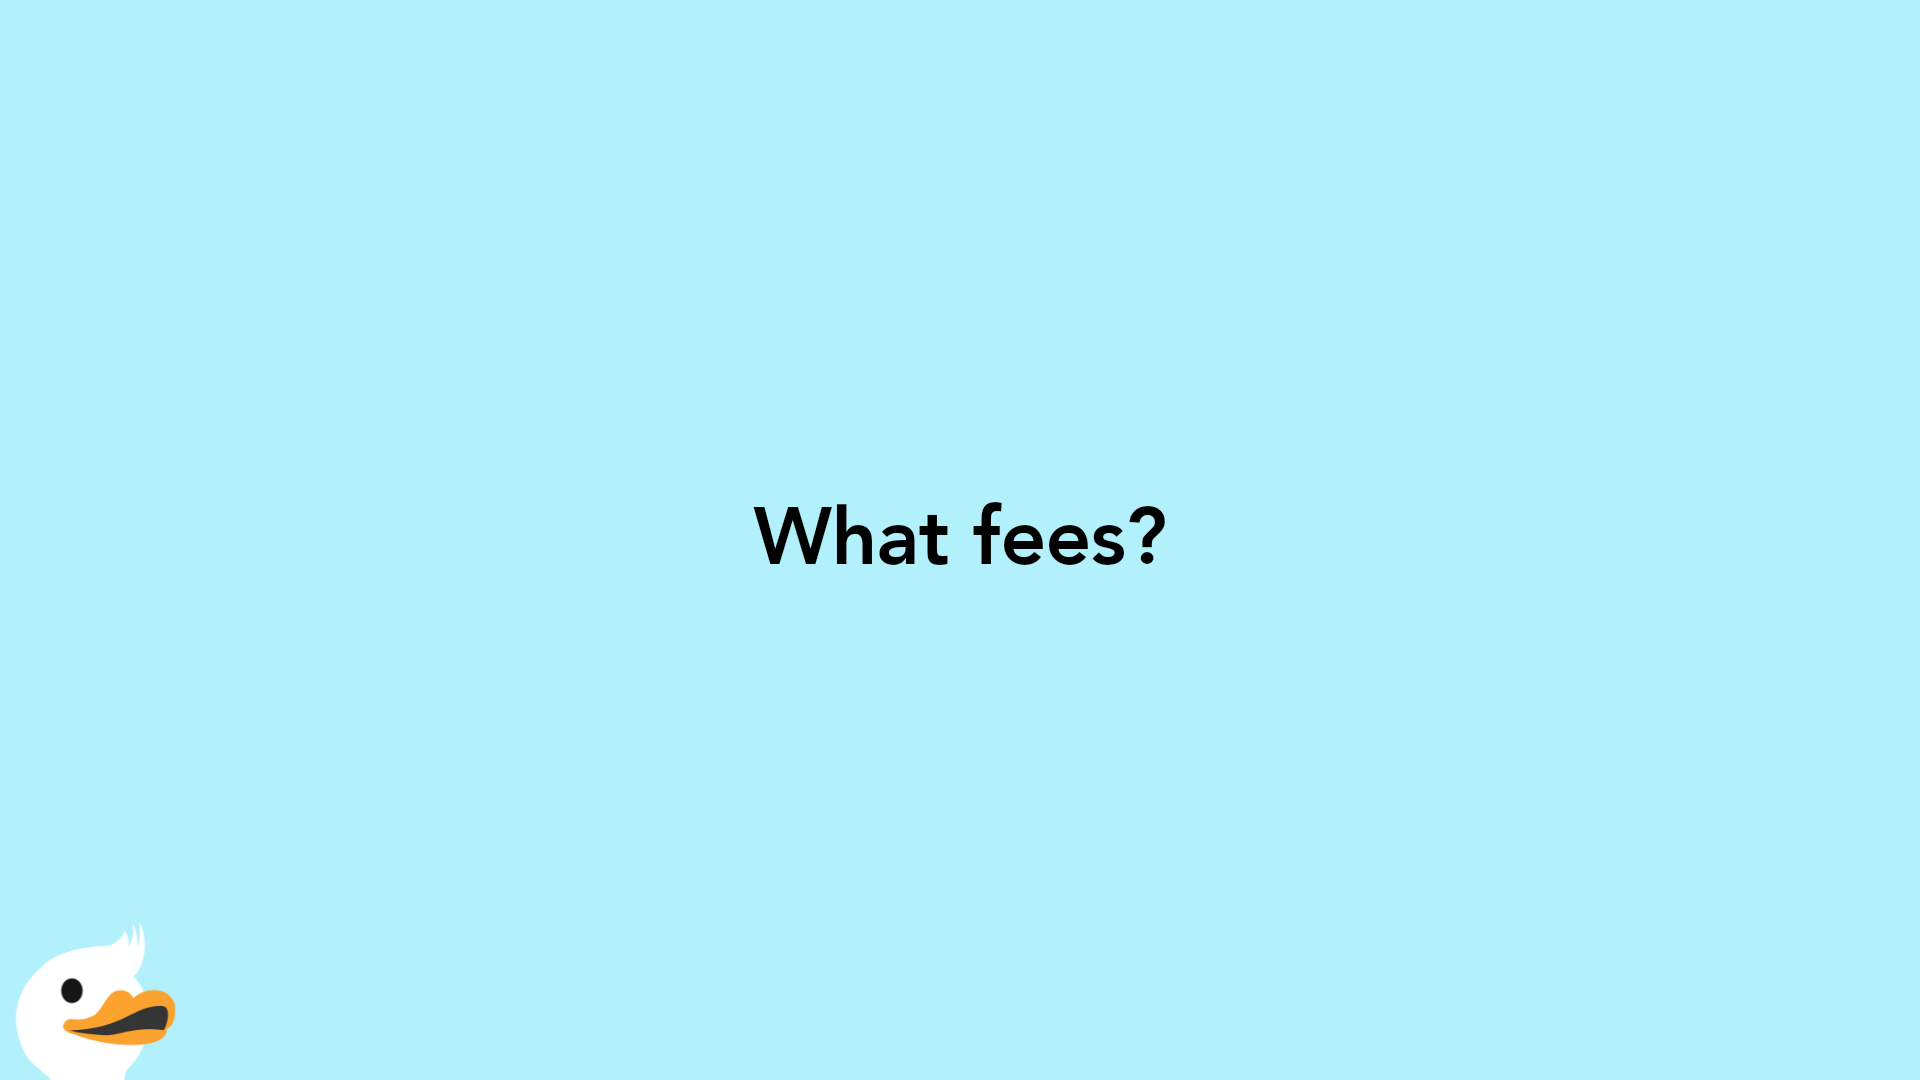 What fees?